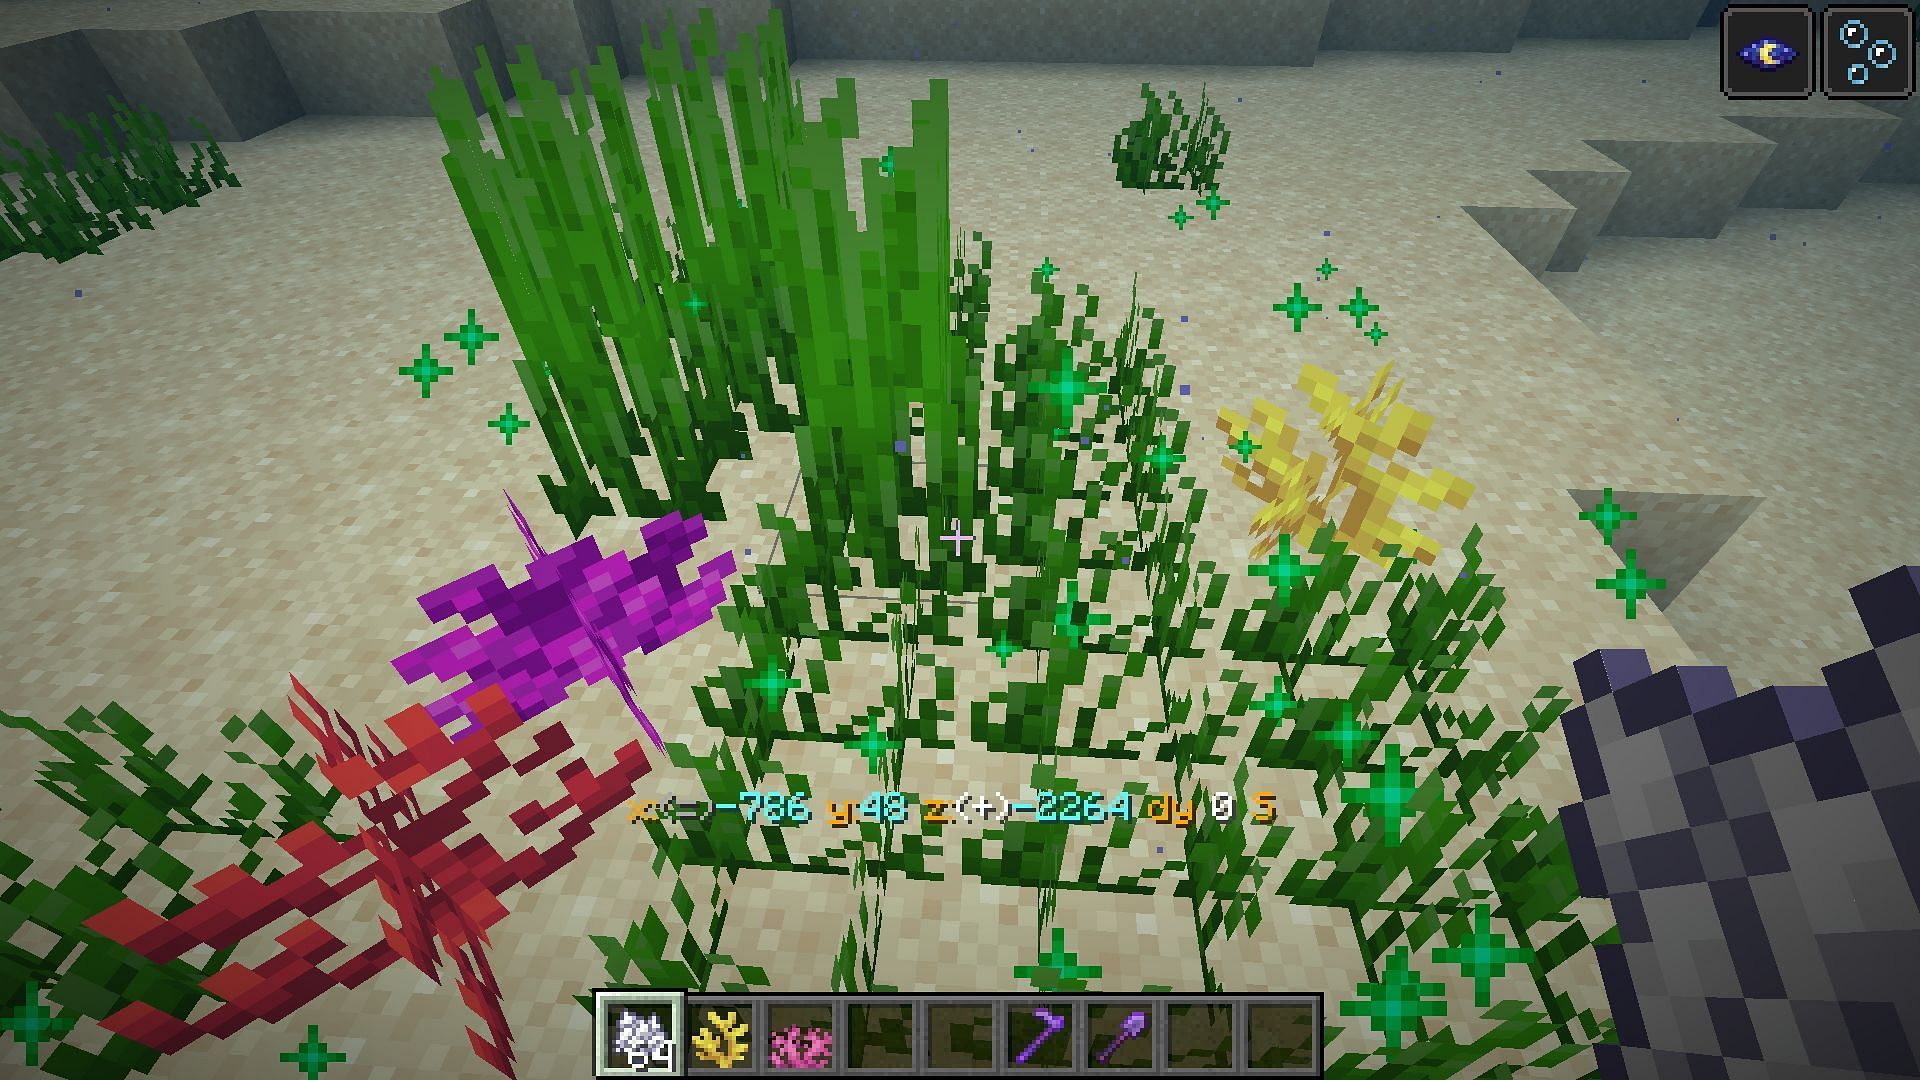 Bone meal will grow seagrass along with occasional corals in Minecraft (Image via Mojang)